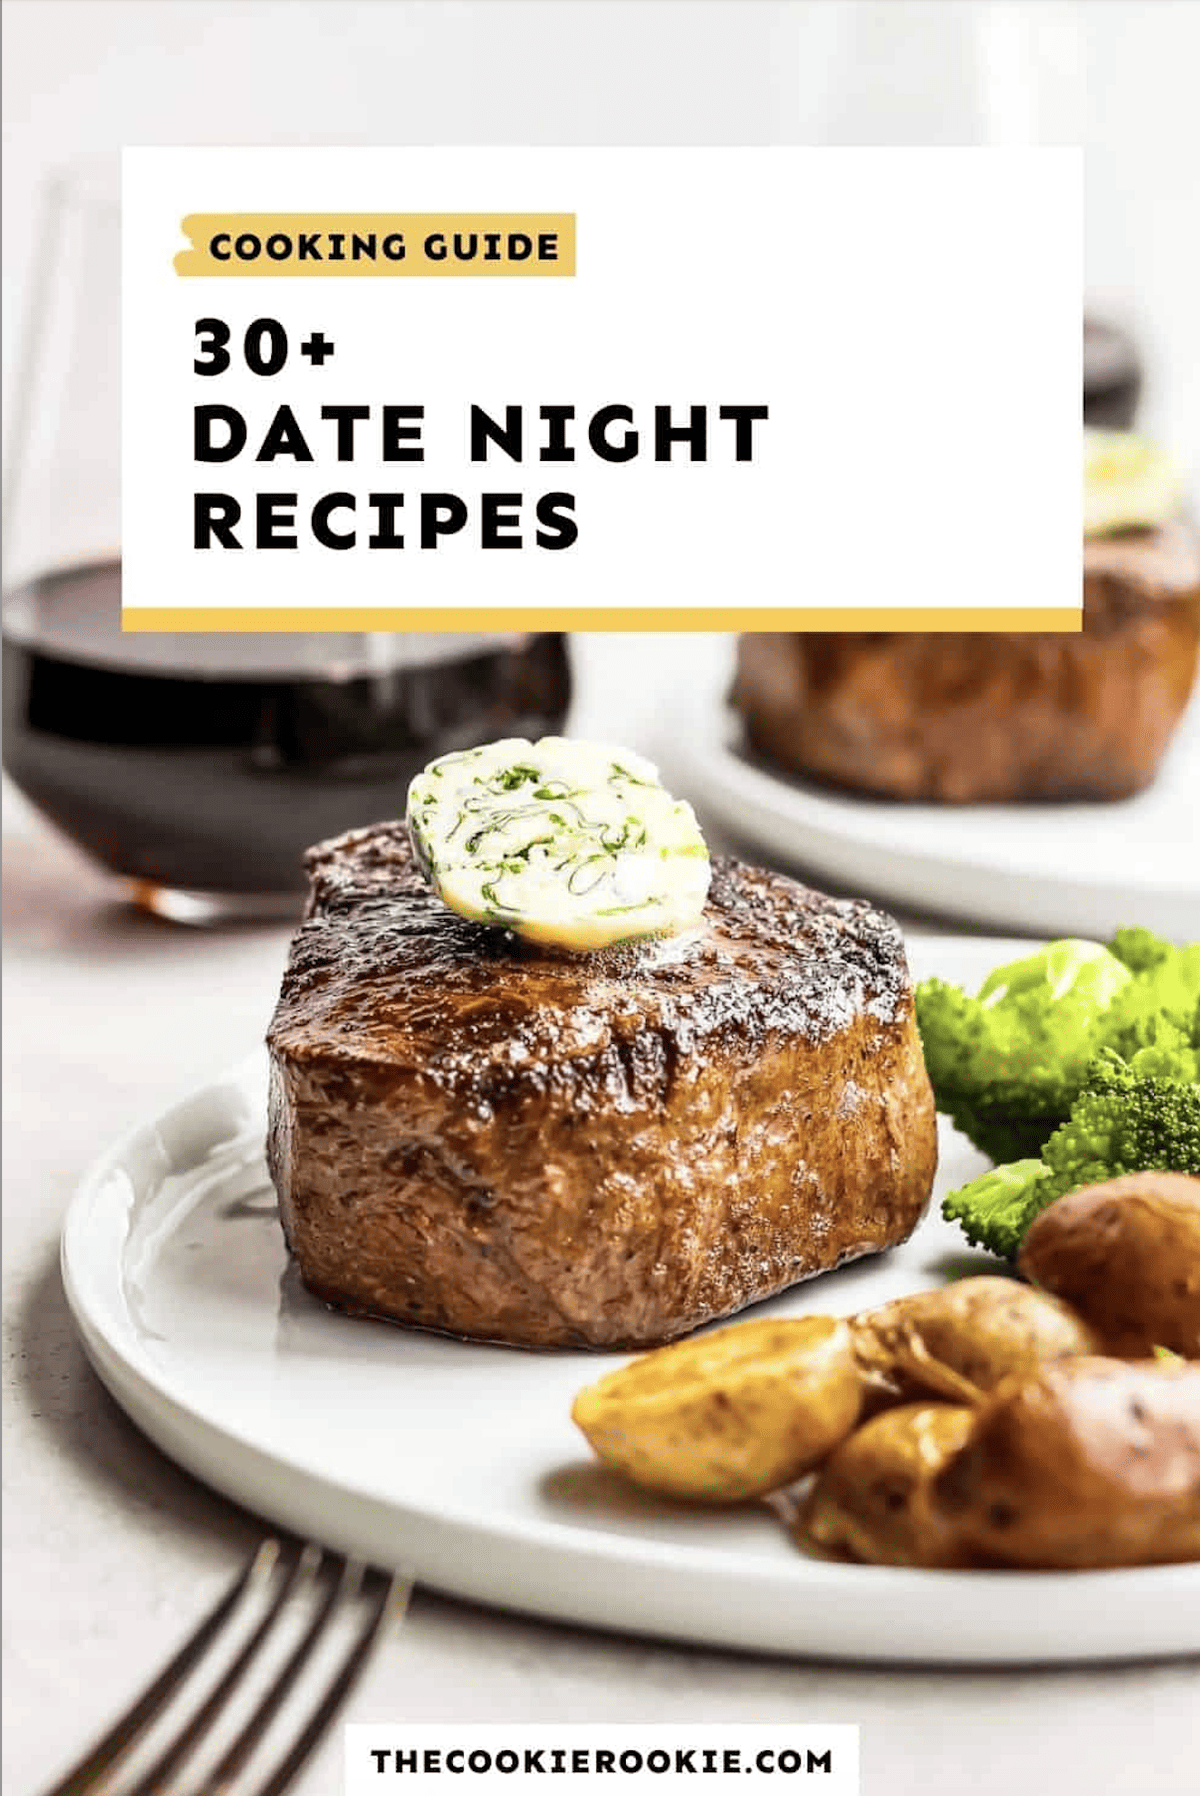 A plate of steak and broccoli with the title cooking guide 30 date night recipes.